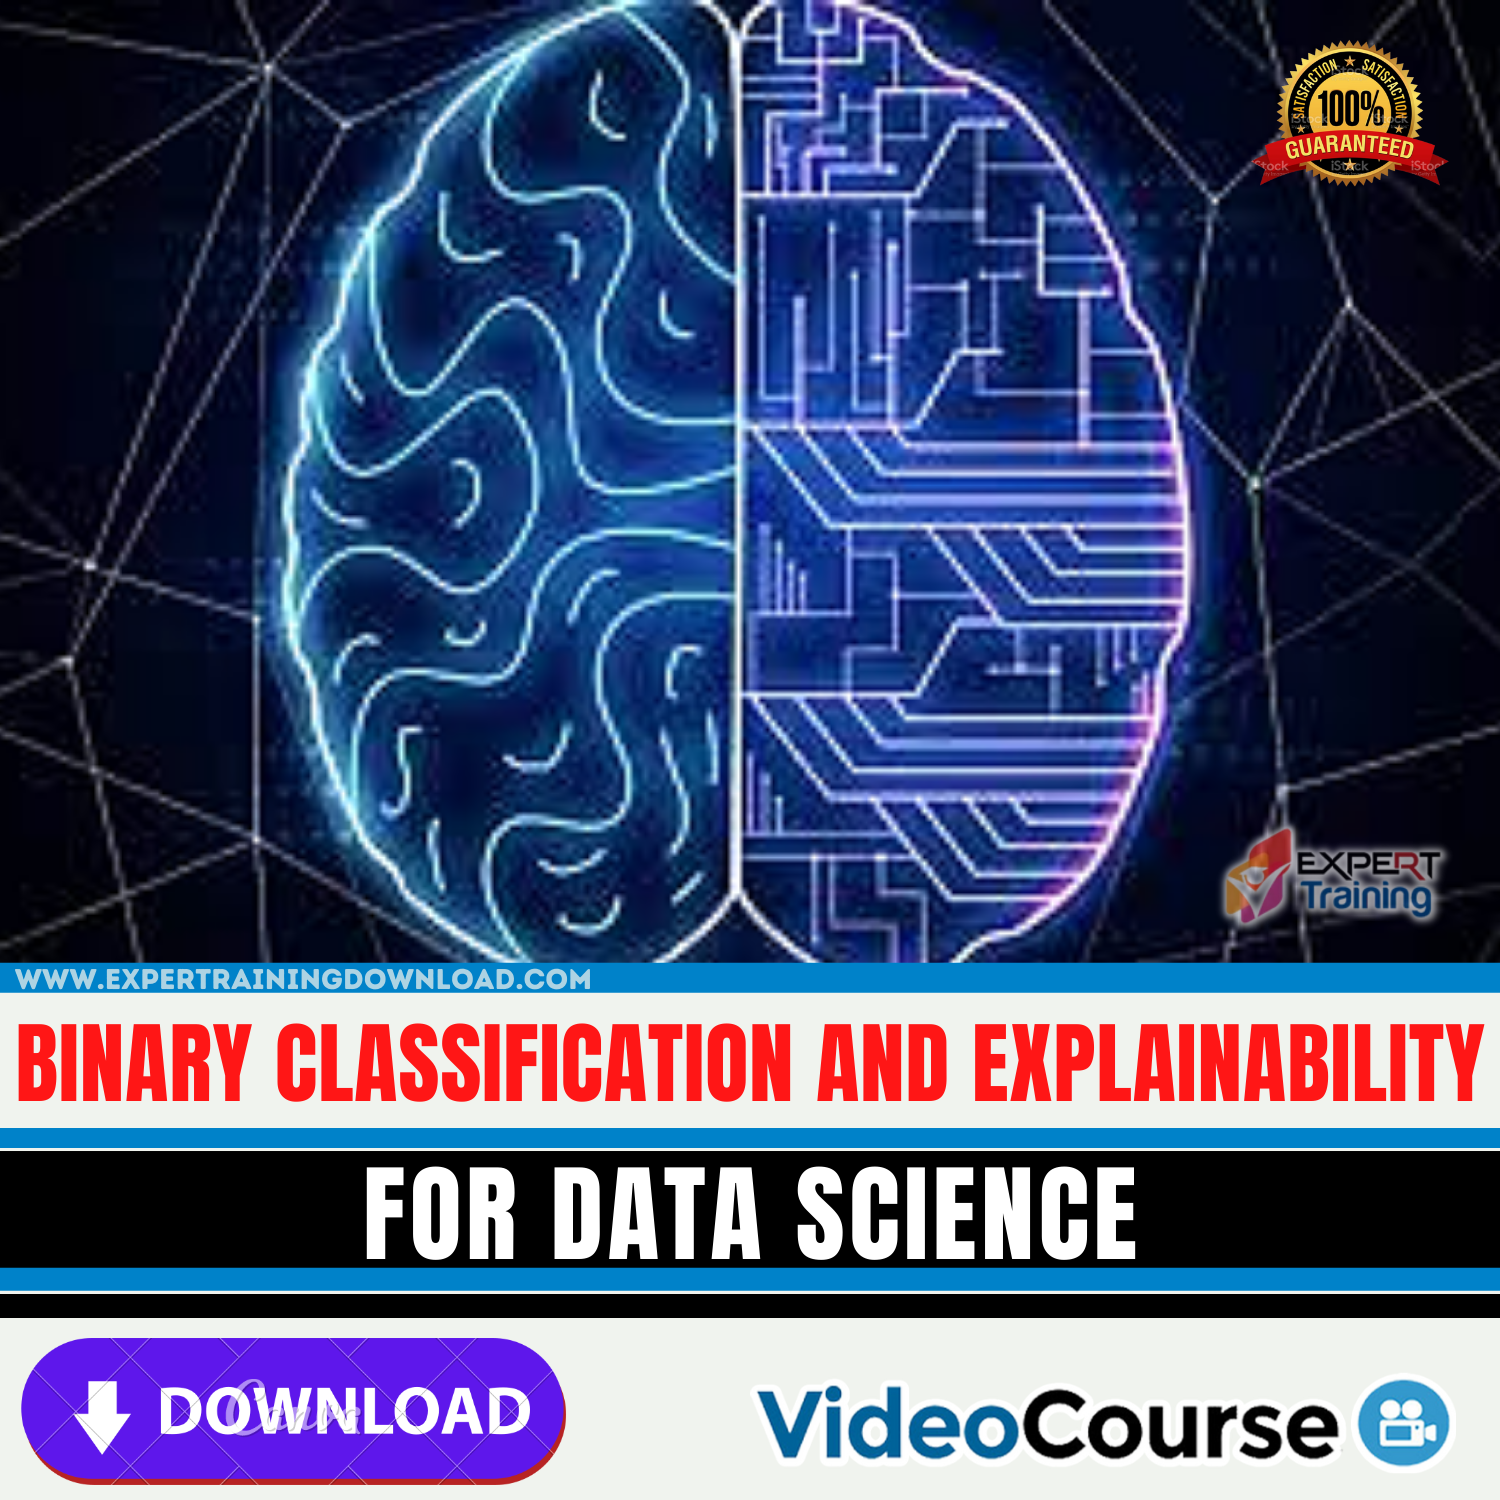 Binary Classification and Explainability for Data Science